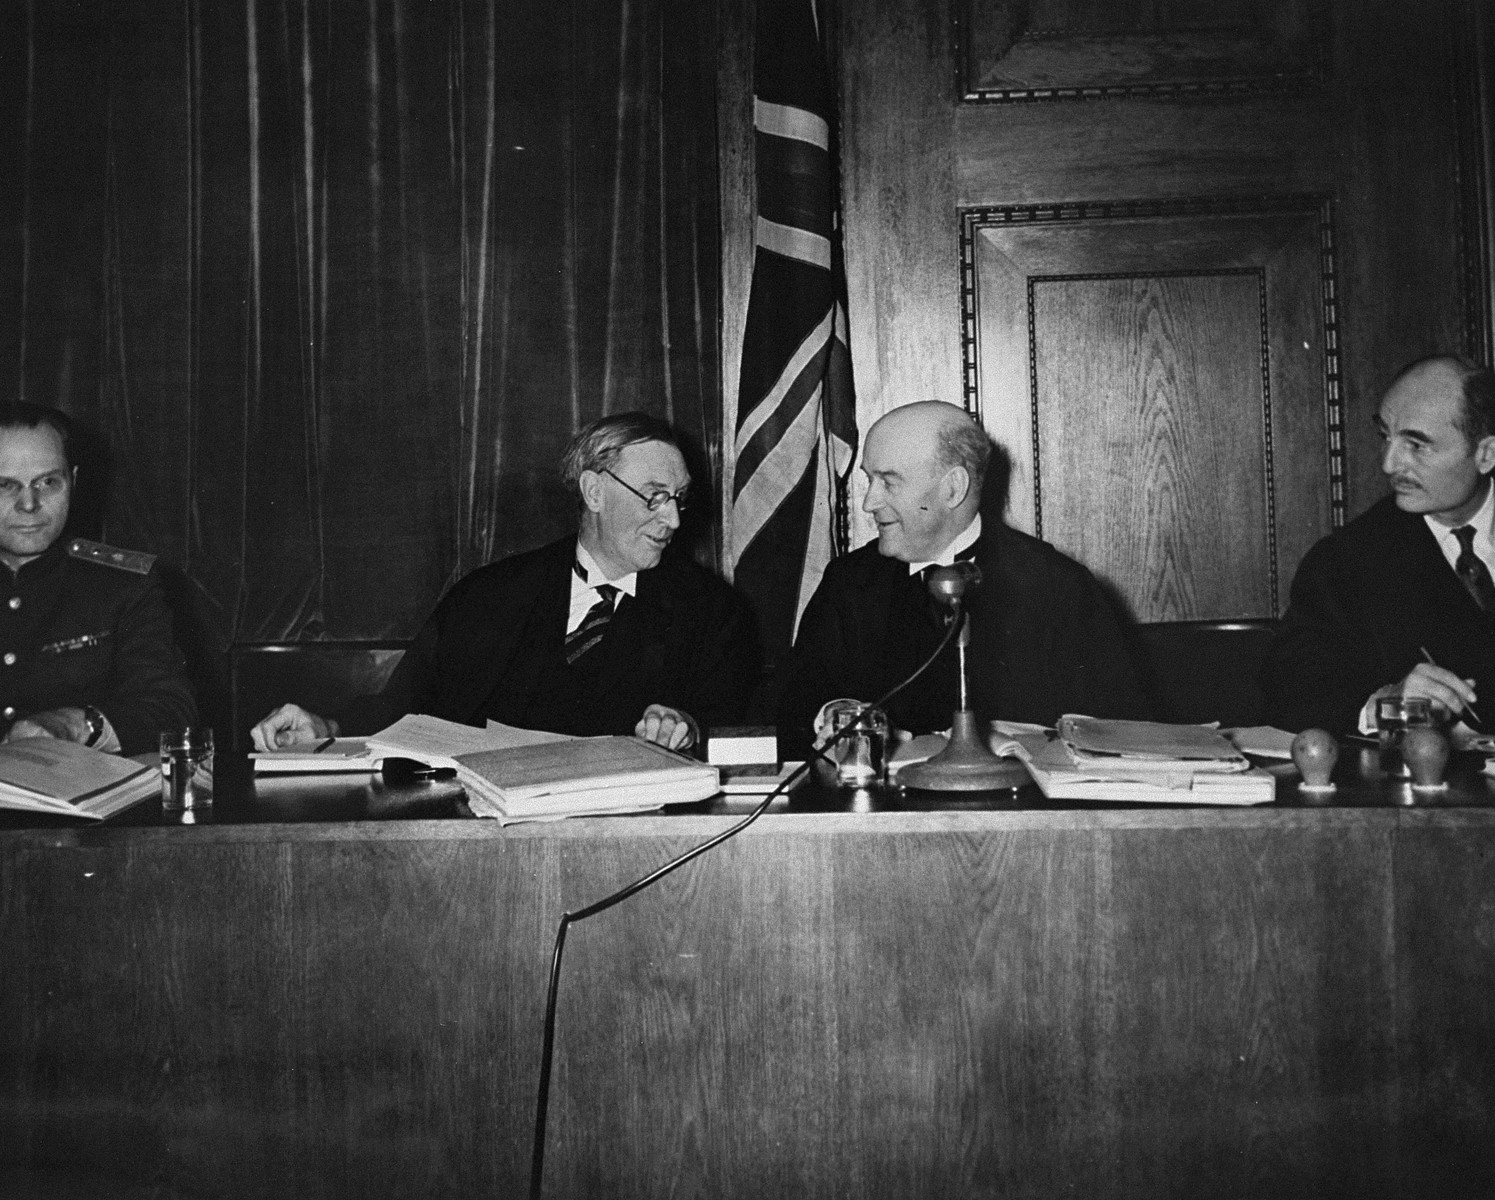 Four members of the International Military Tribunal sit on the bench in the courtroom in Nuremberg.

Pictured from left to right are: Major General I.T. Nikitchenko (Soviet), Justice Norman Birkett (British) Lord Justice Geoffrey Lawrence (British), and Francis Biddle (American).